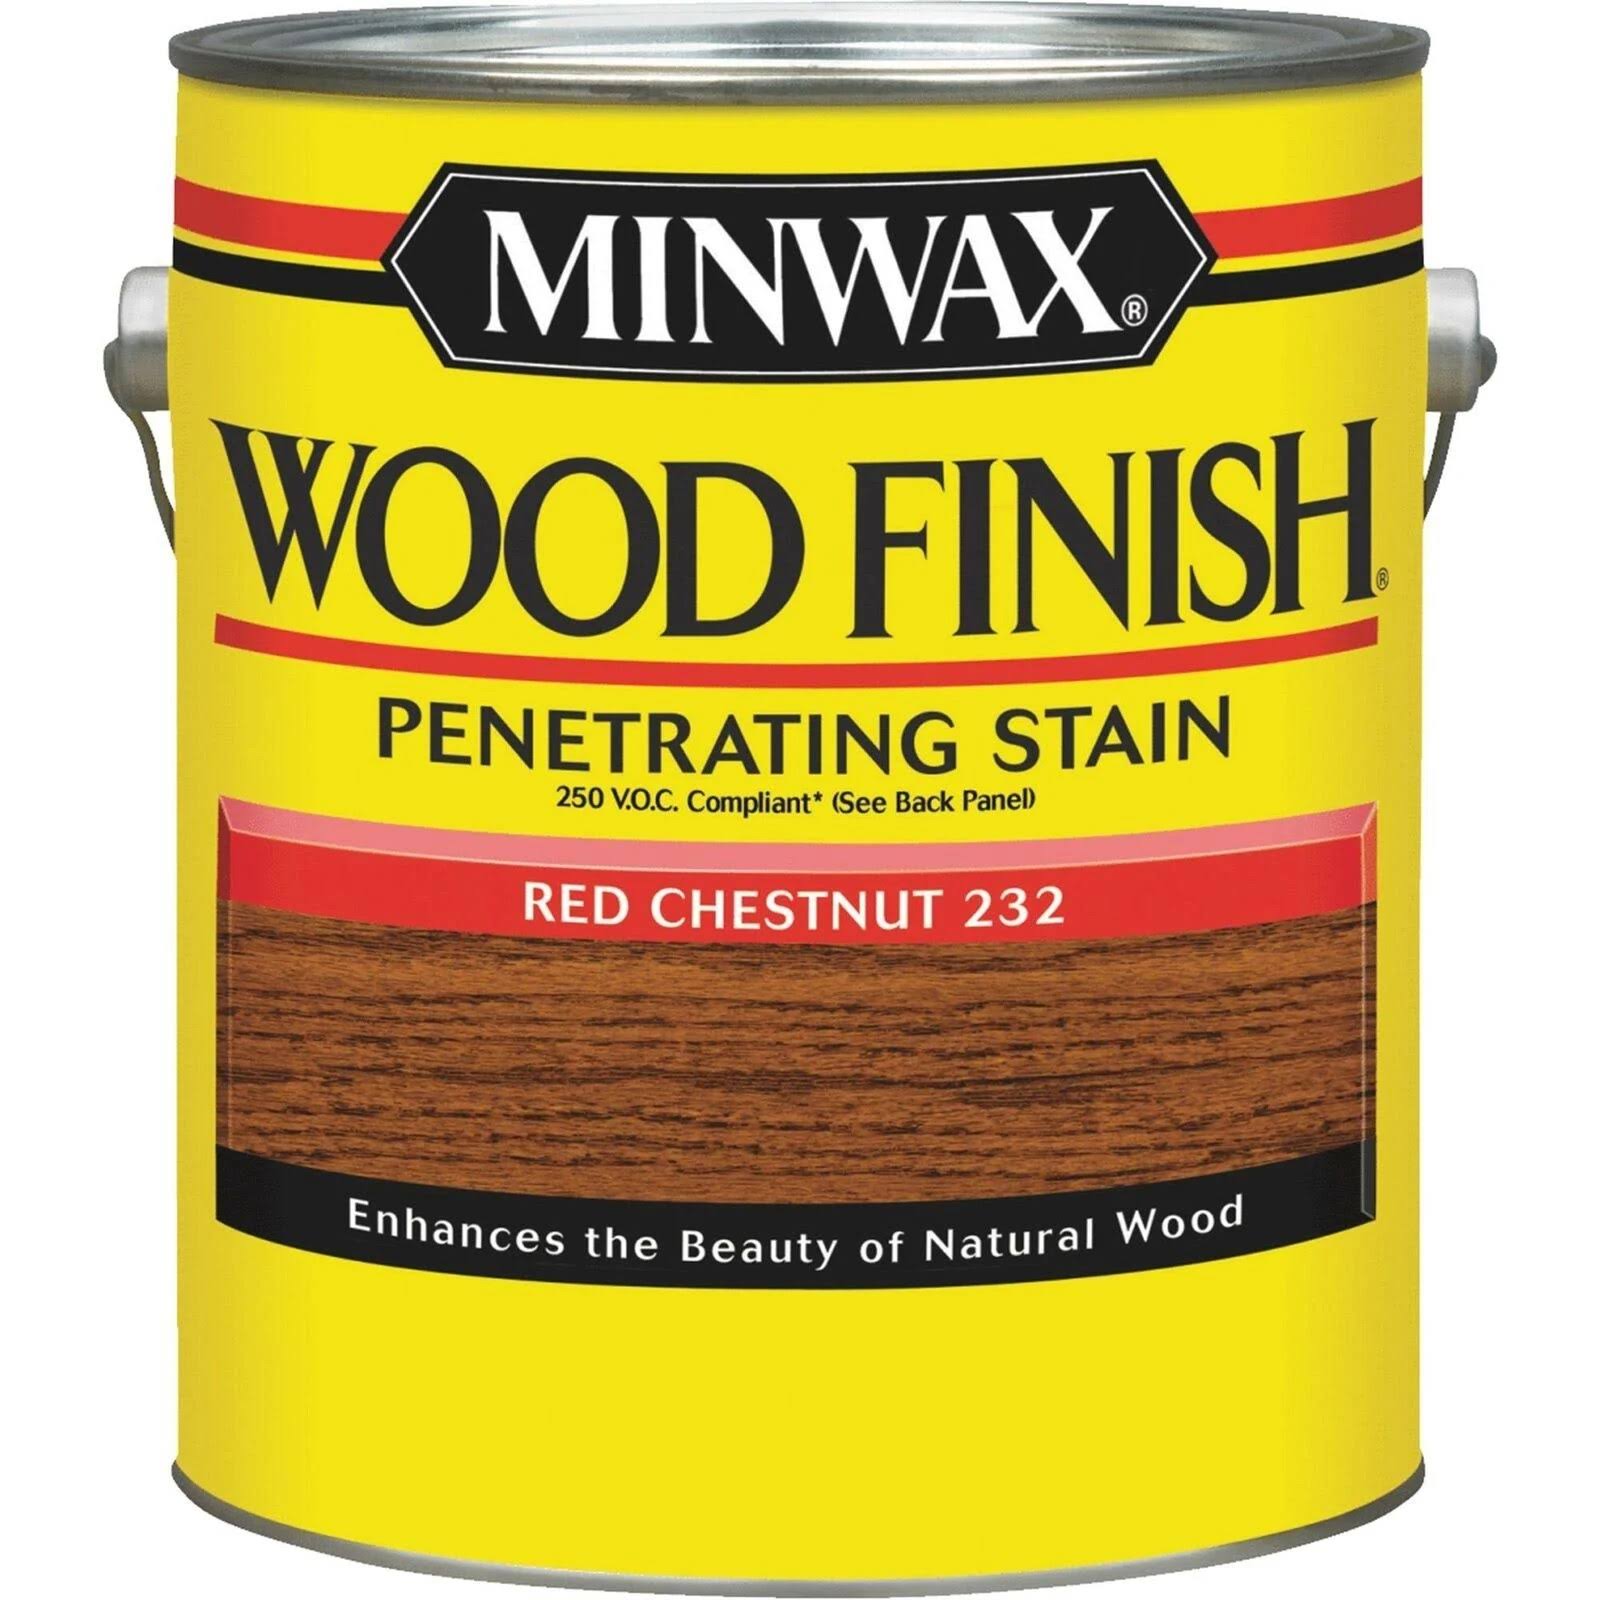 Minwax Wood Finish Penetrating Stain - Red Chestnut 232, 1gal